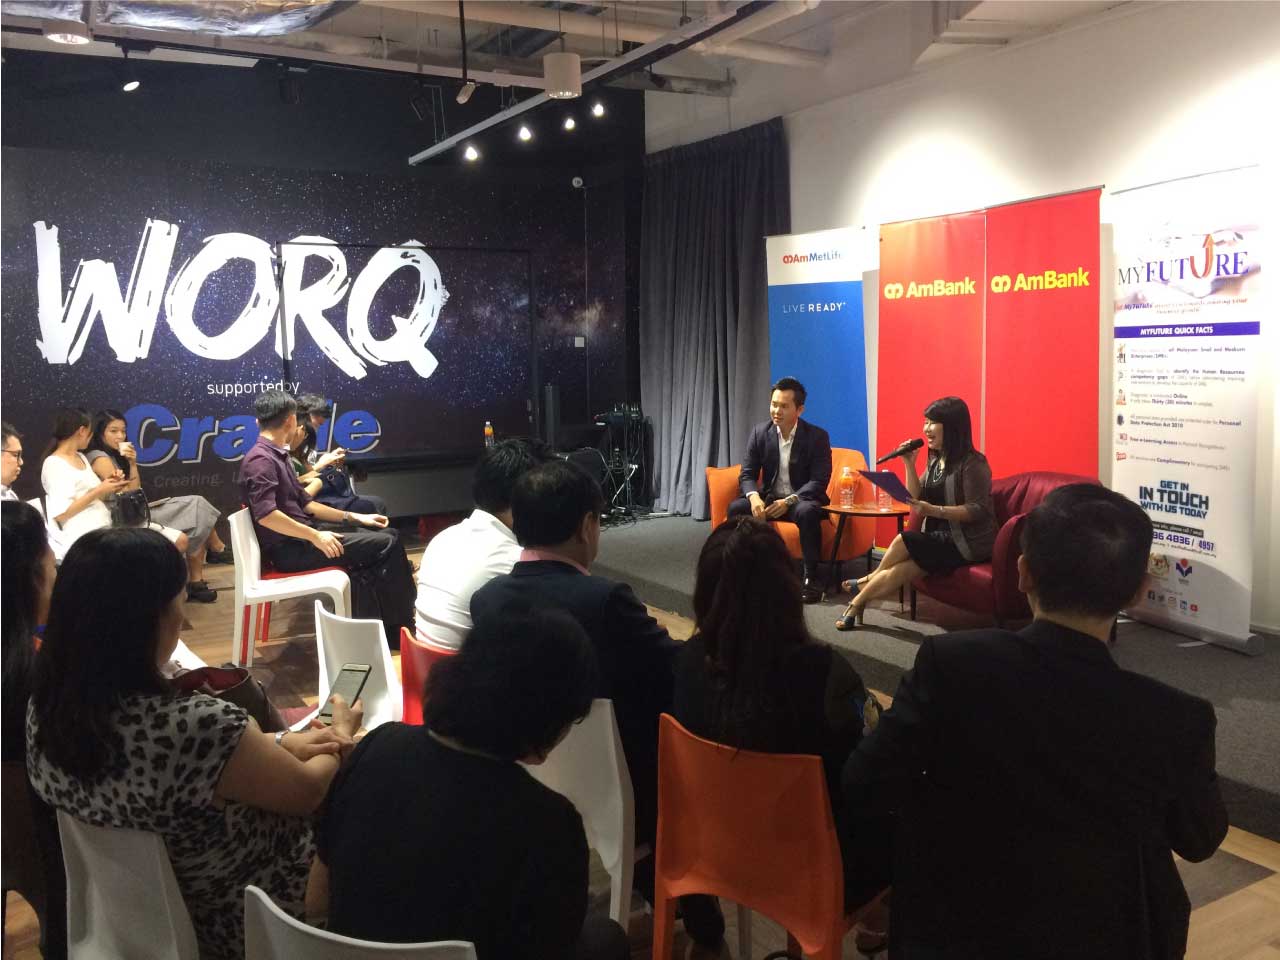 Community event in WORQ with Ambank